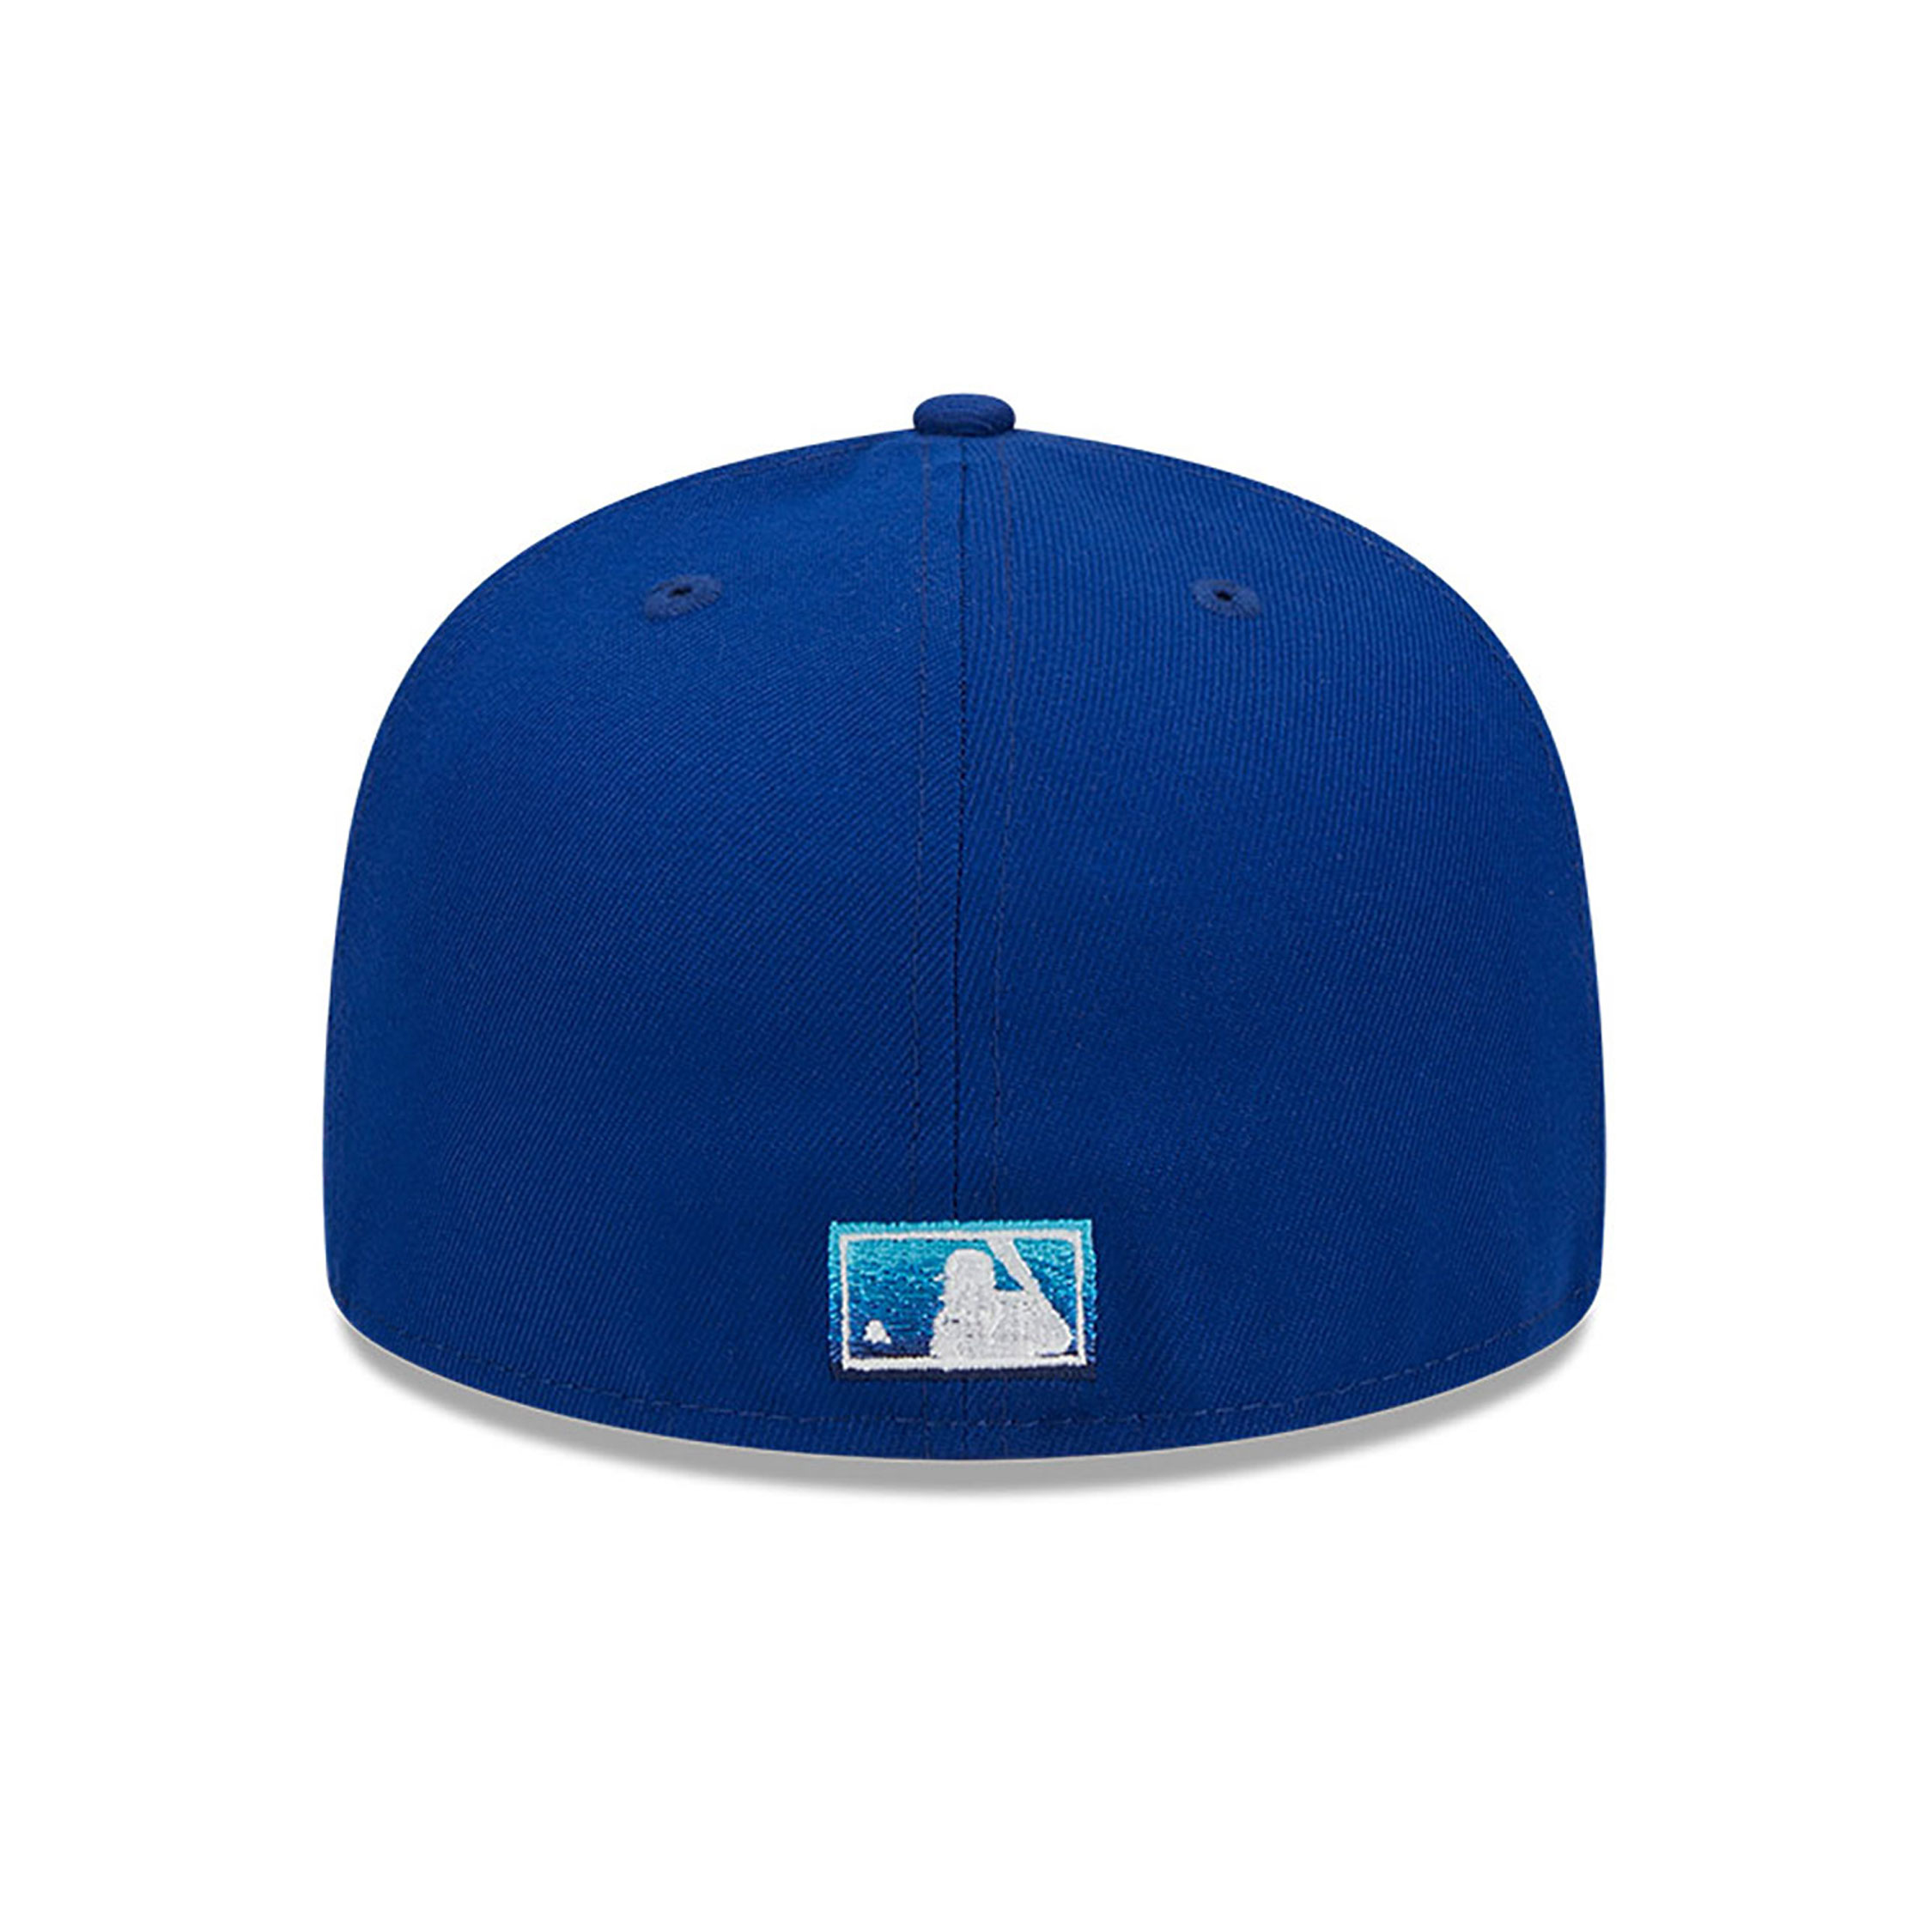 Seattle Mariners Gradient Blue 59FIFTY Fitted Cap